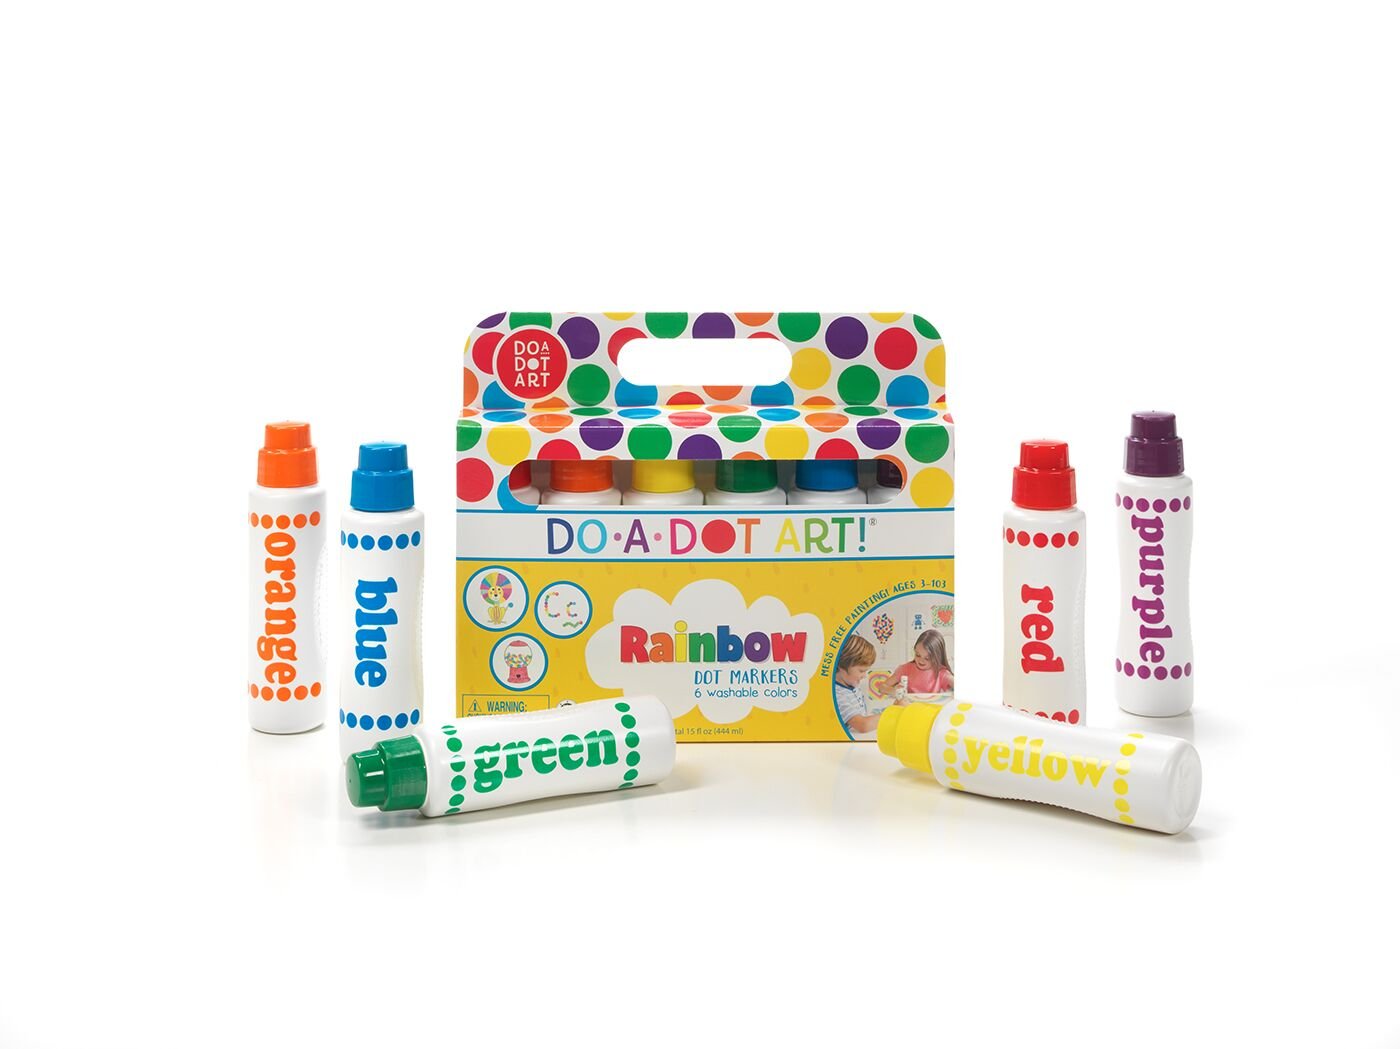 Do A Dot Art! Markers 6-Pack Rainbow Washable Paint Markers, The Original Dot Marker